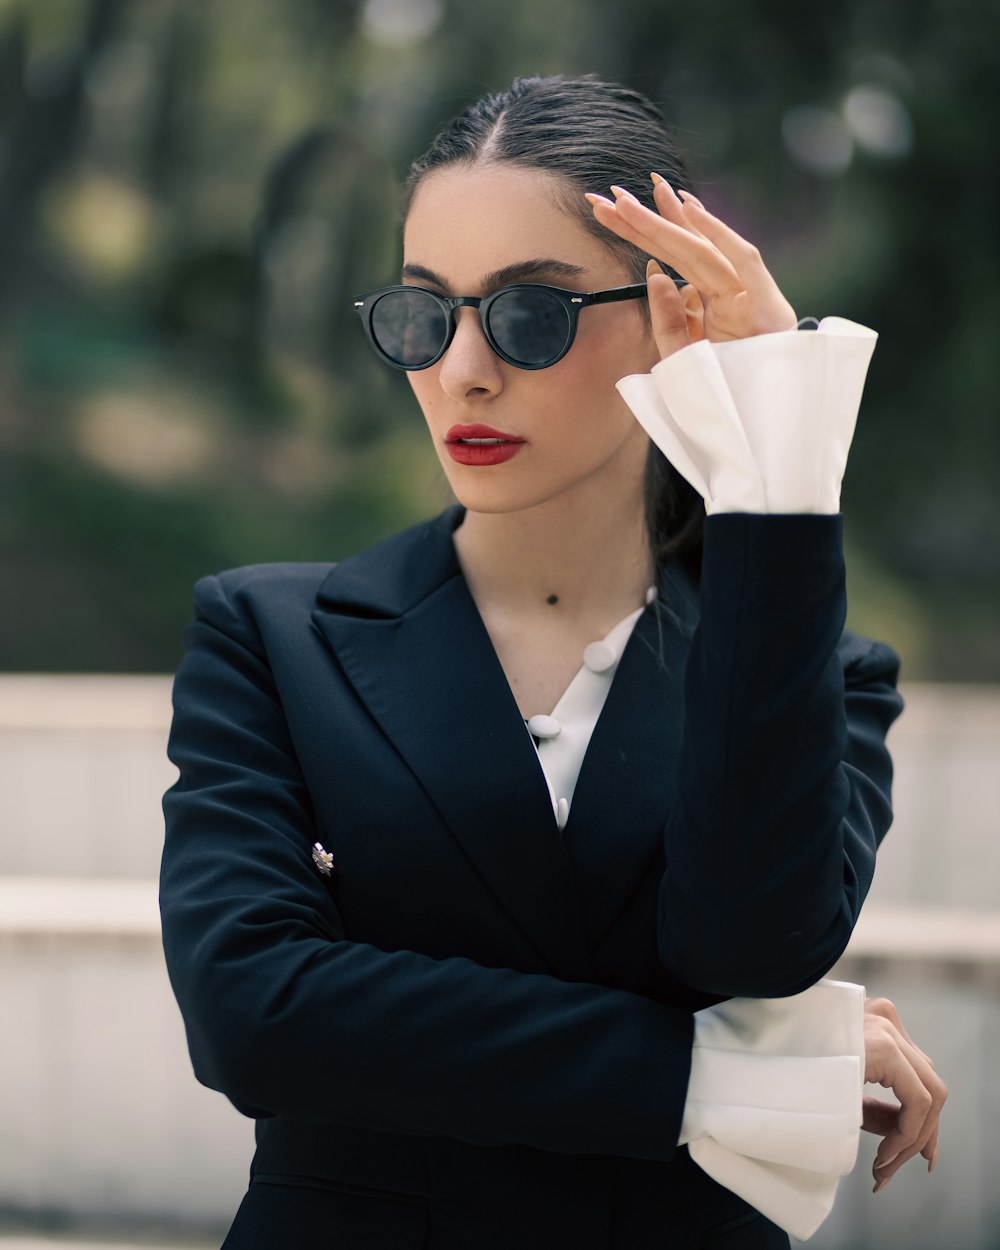 a woman in a black suit and sunglasses